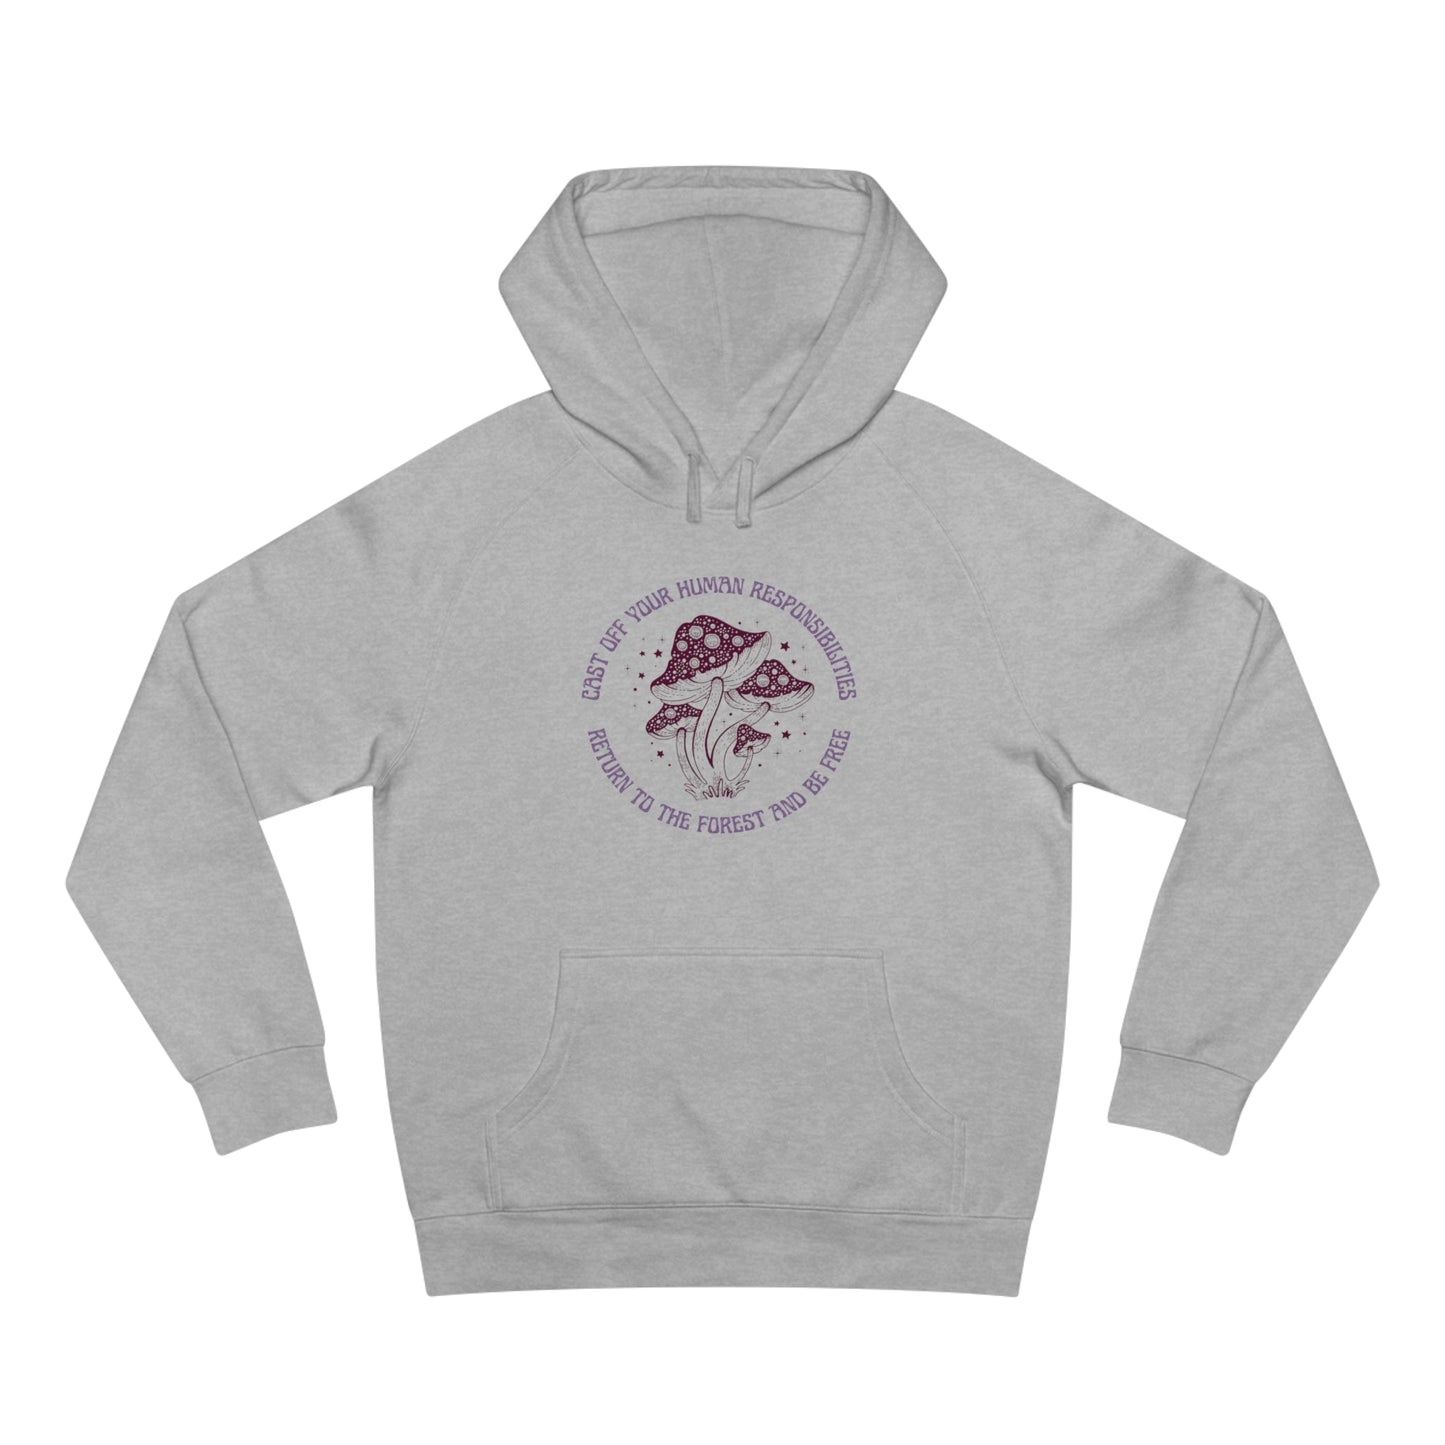 Cast Off Your Human Responsibilities Return to the Forest Unisex Supply Hoodie Sizes S-3X